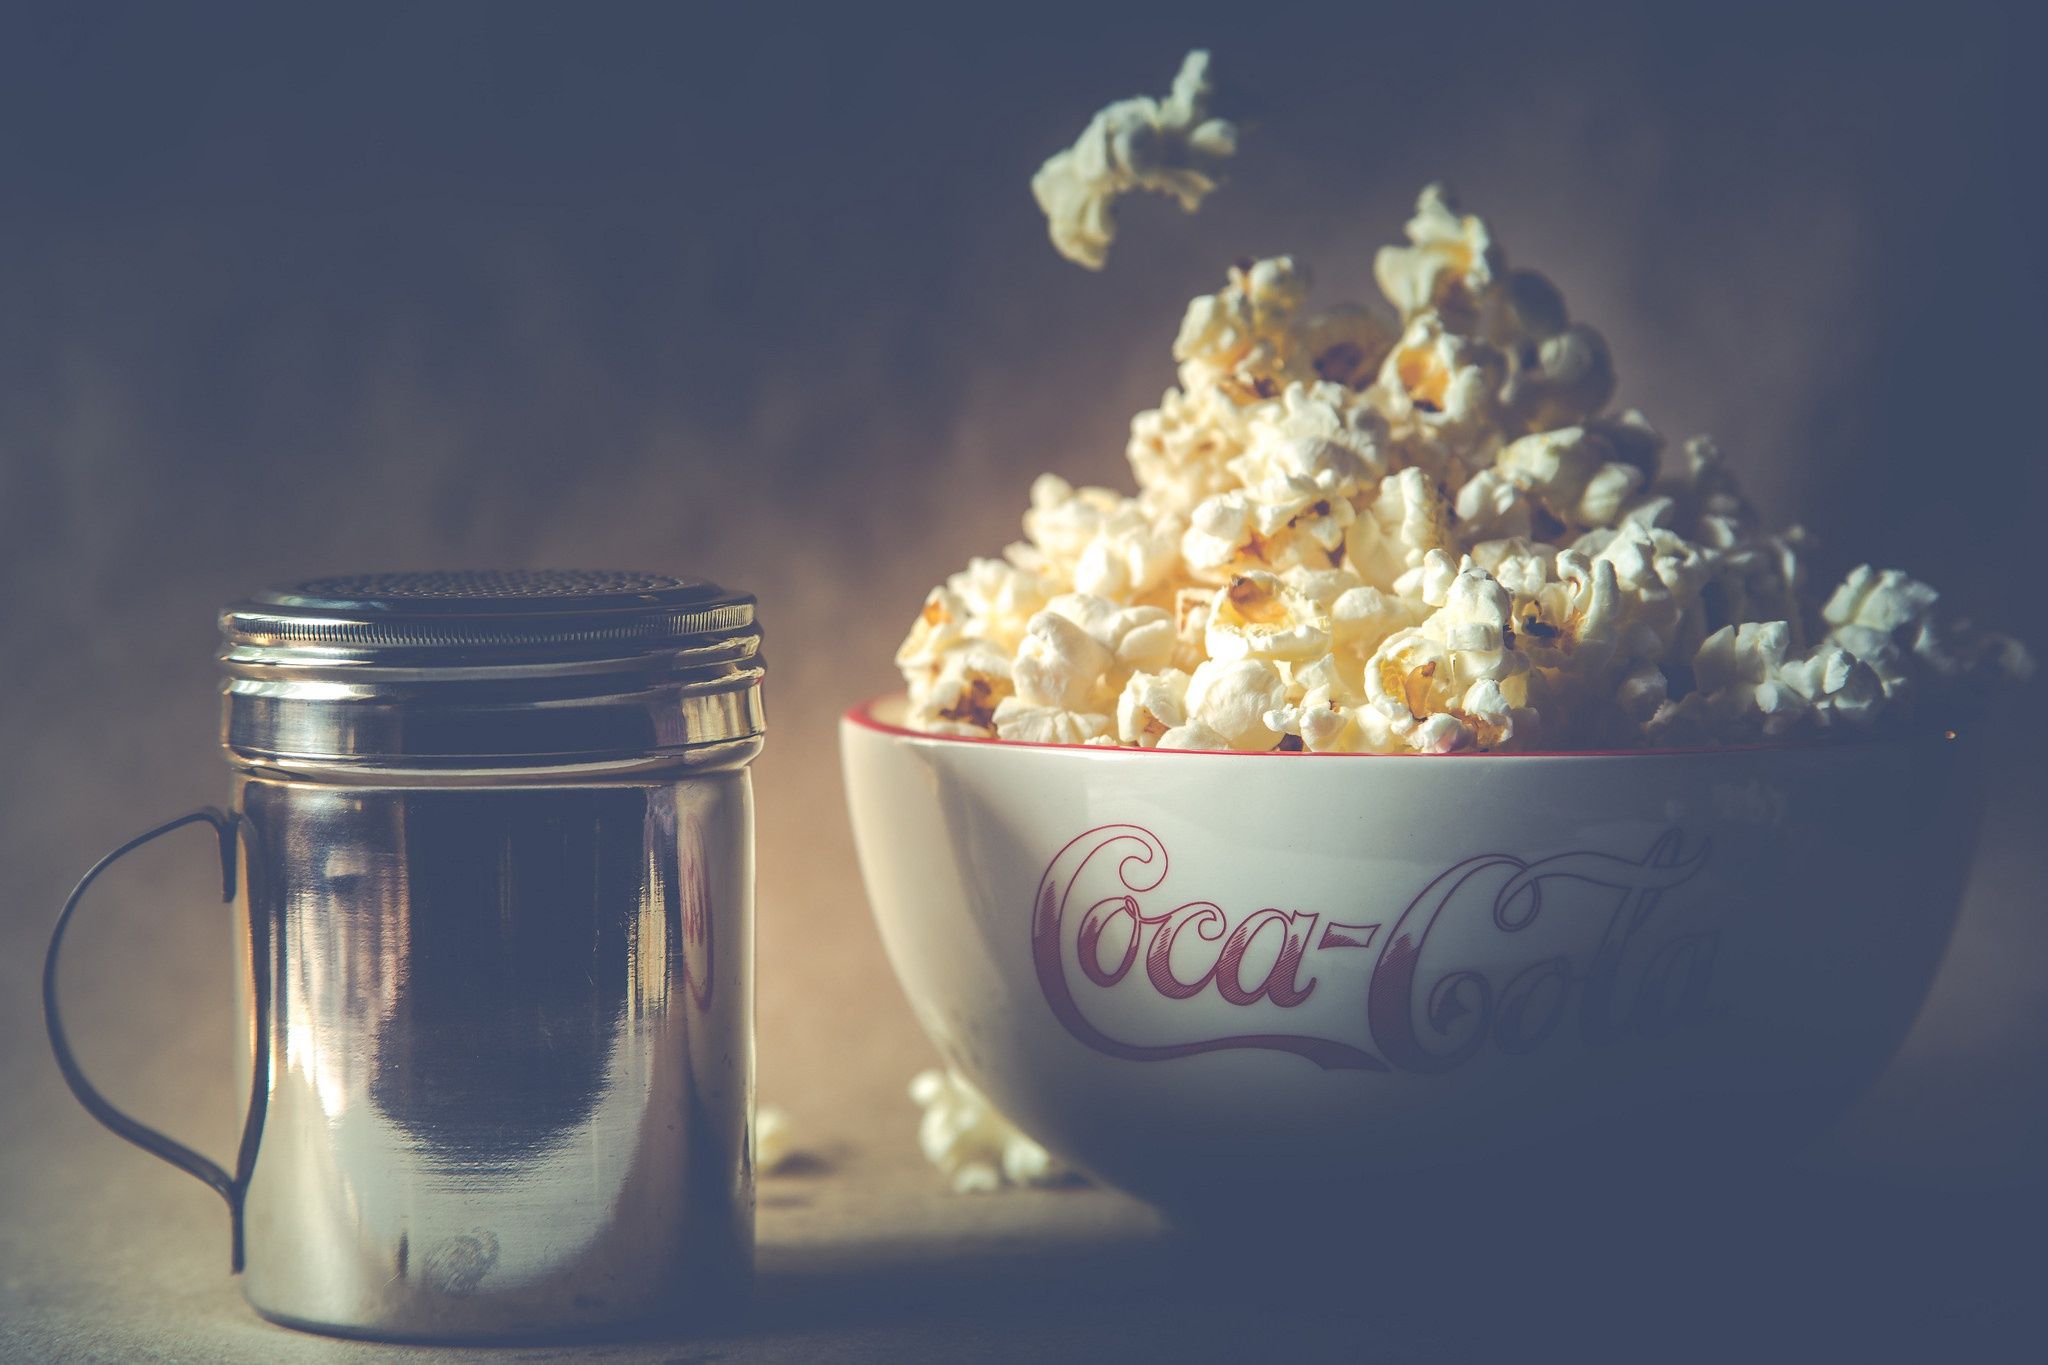 A bowl of popcorn and a bottle of soda on a table. - Popcorn